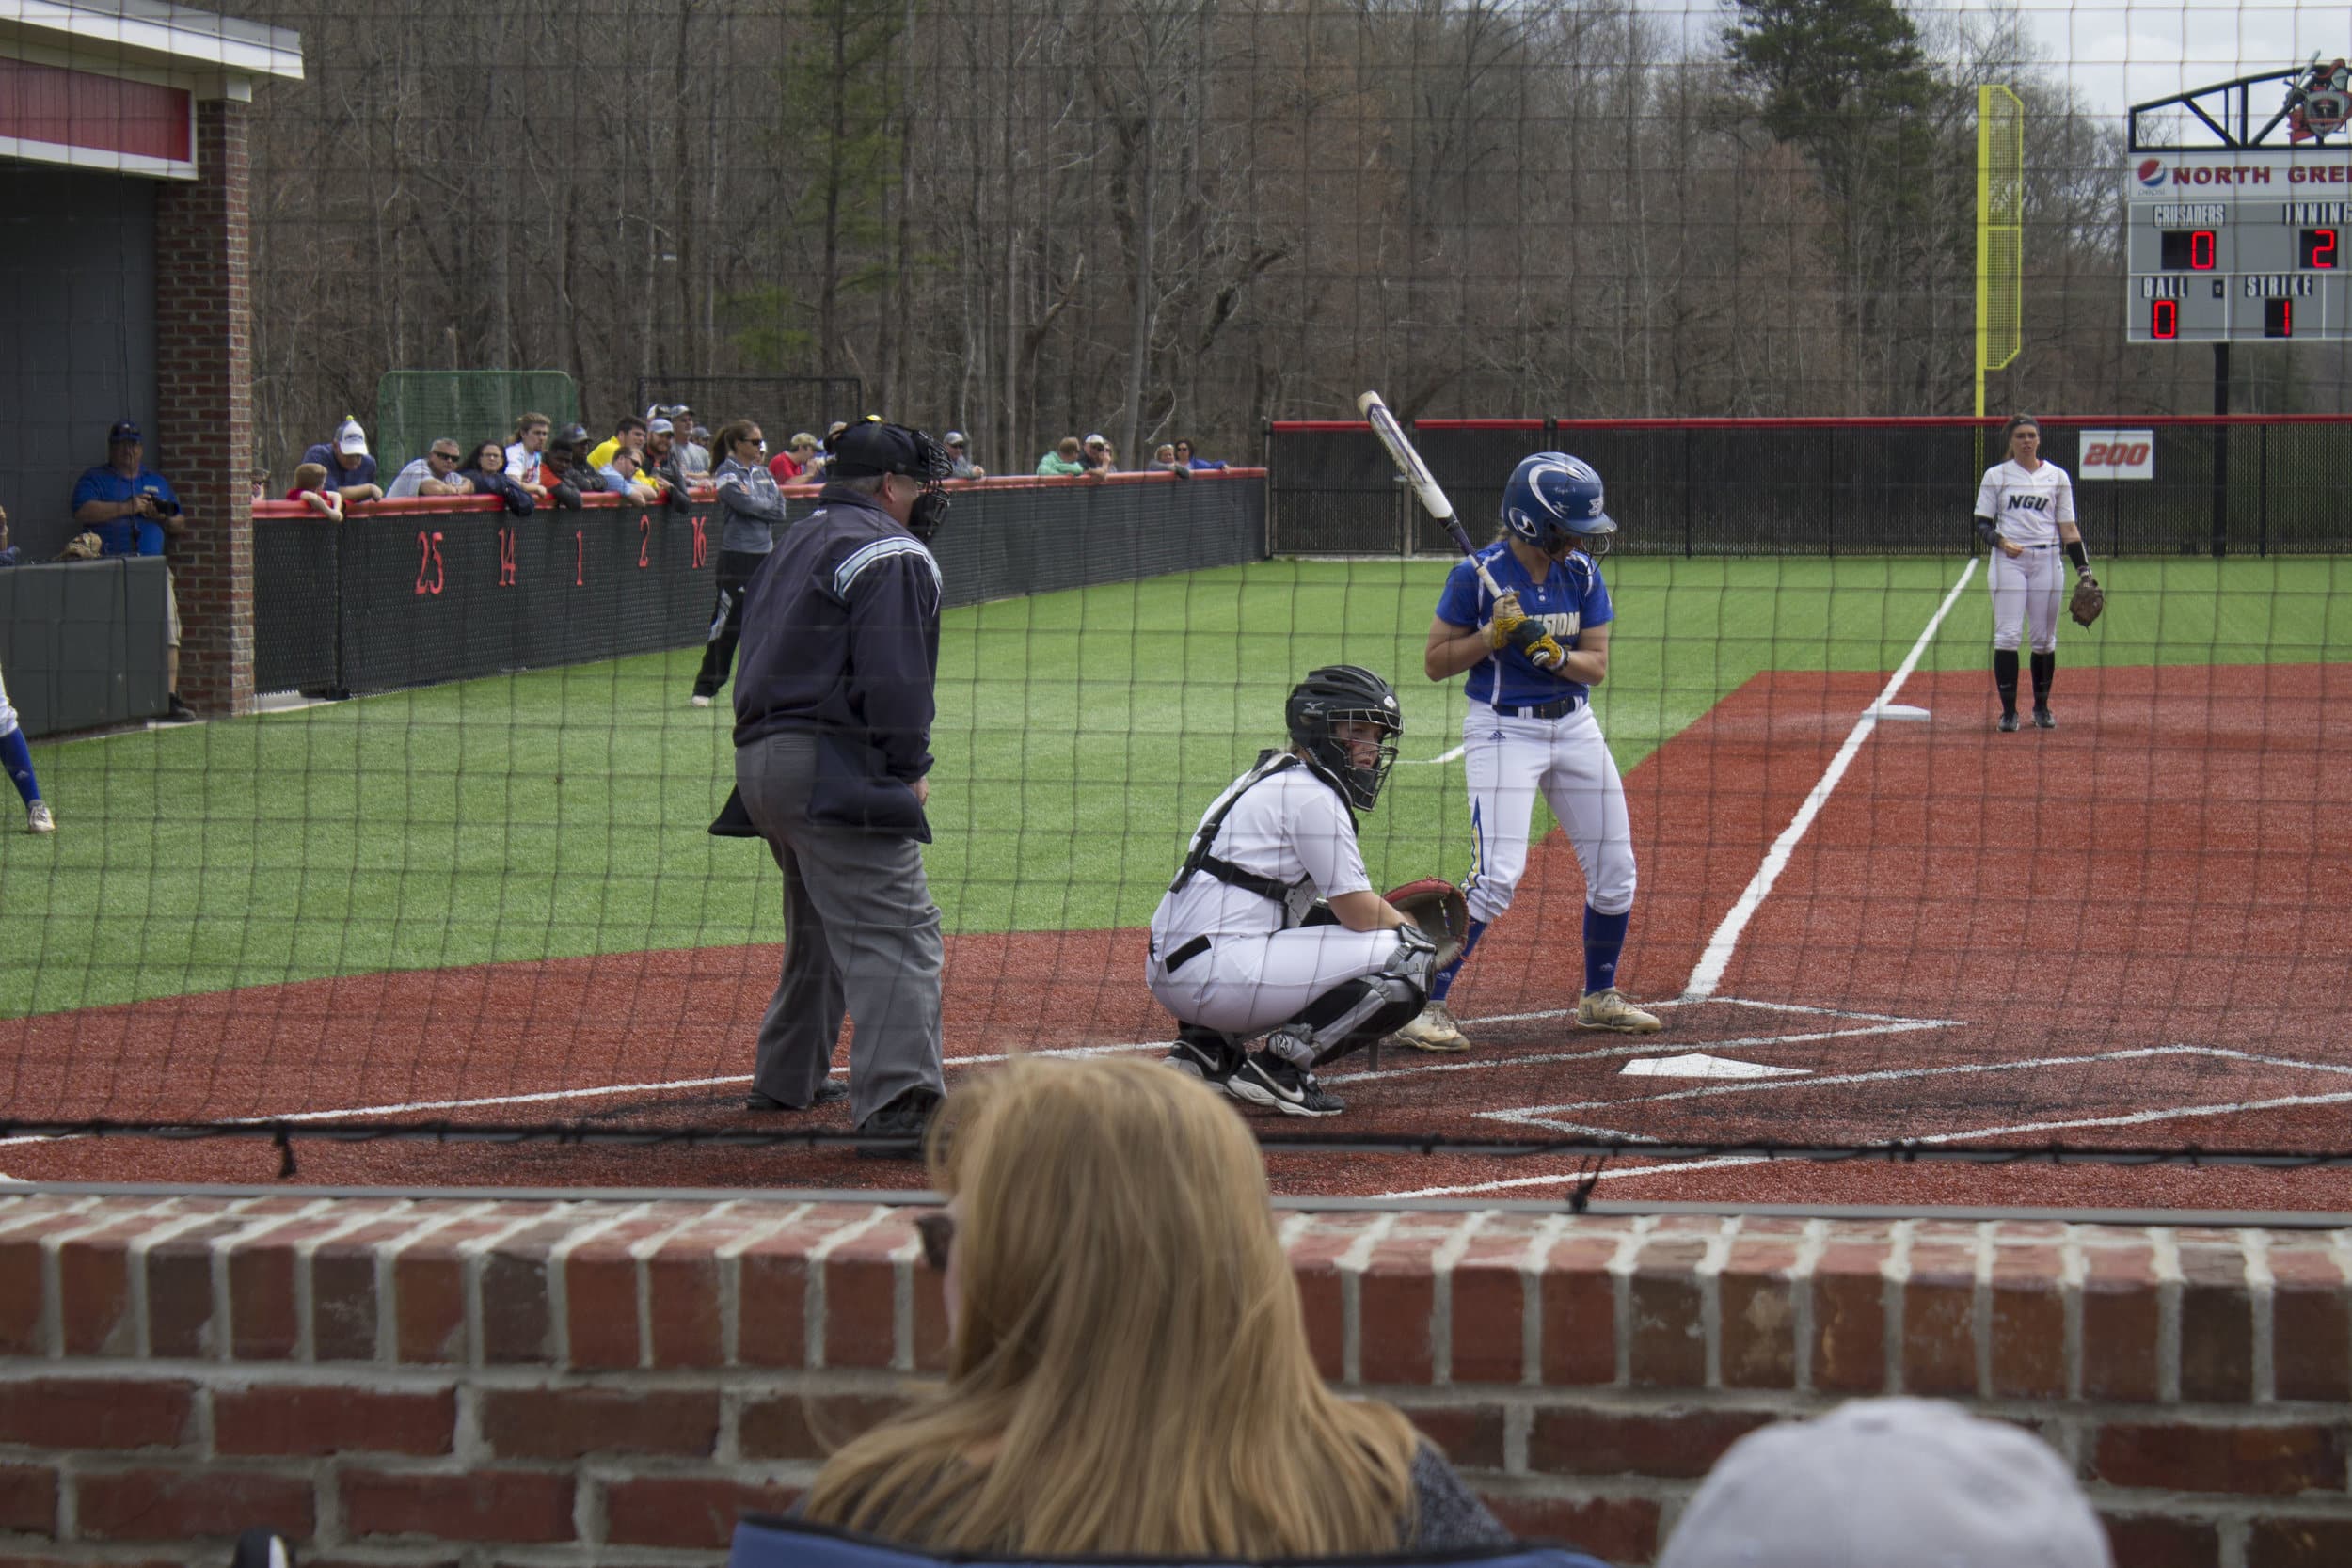 The catcher for North Greenville looks to the dugout for the pitching call.